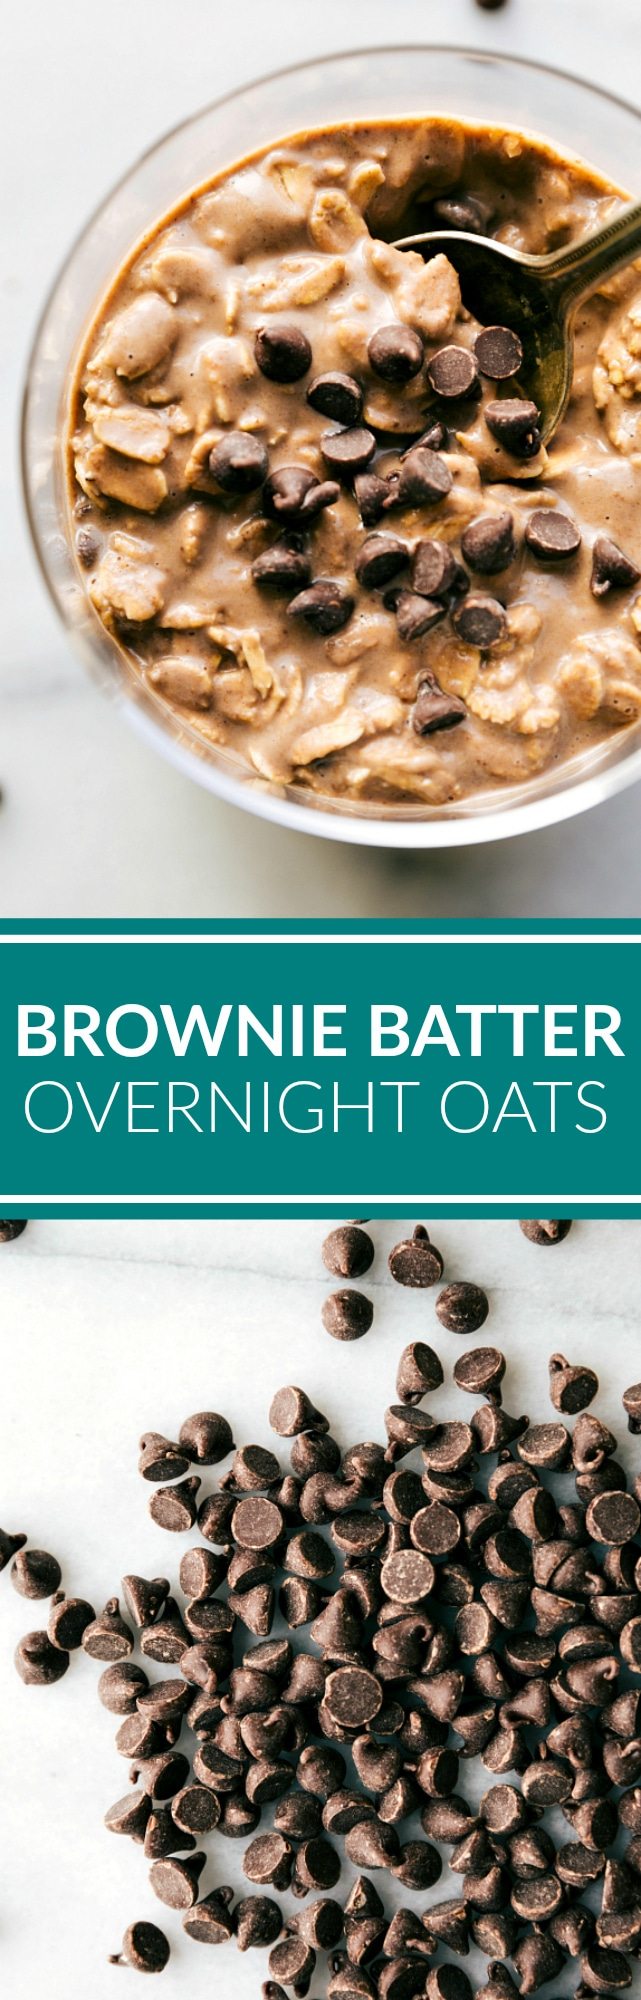 A double-chocolate, brownie flavored batch of overnight oats. These take minutes to prepare and taste so good it will be like eating dessert for breakfast. Recipe via chelseasmessyapron.com